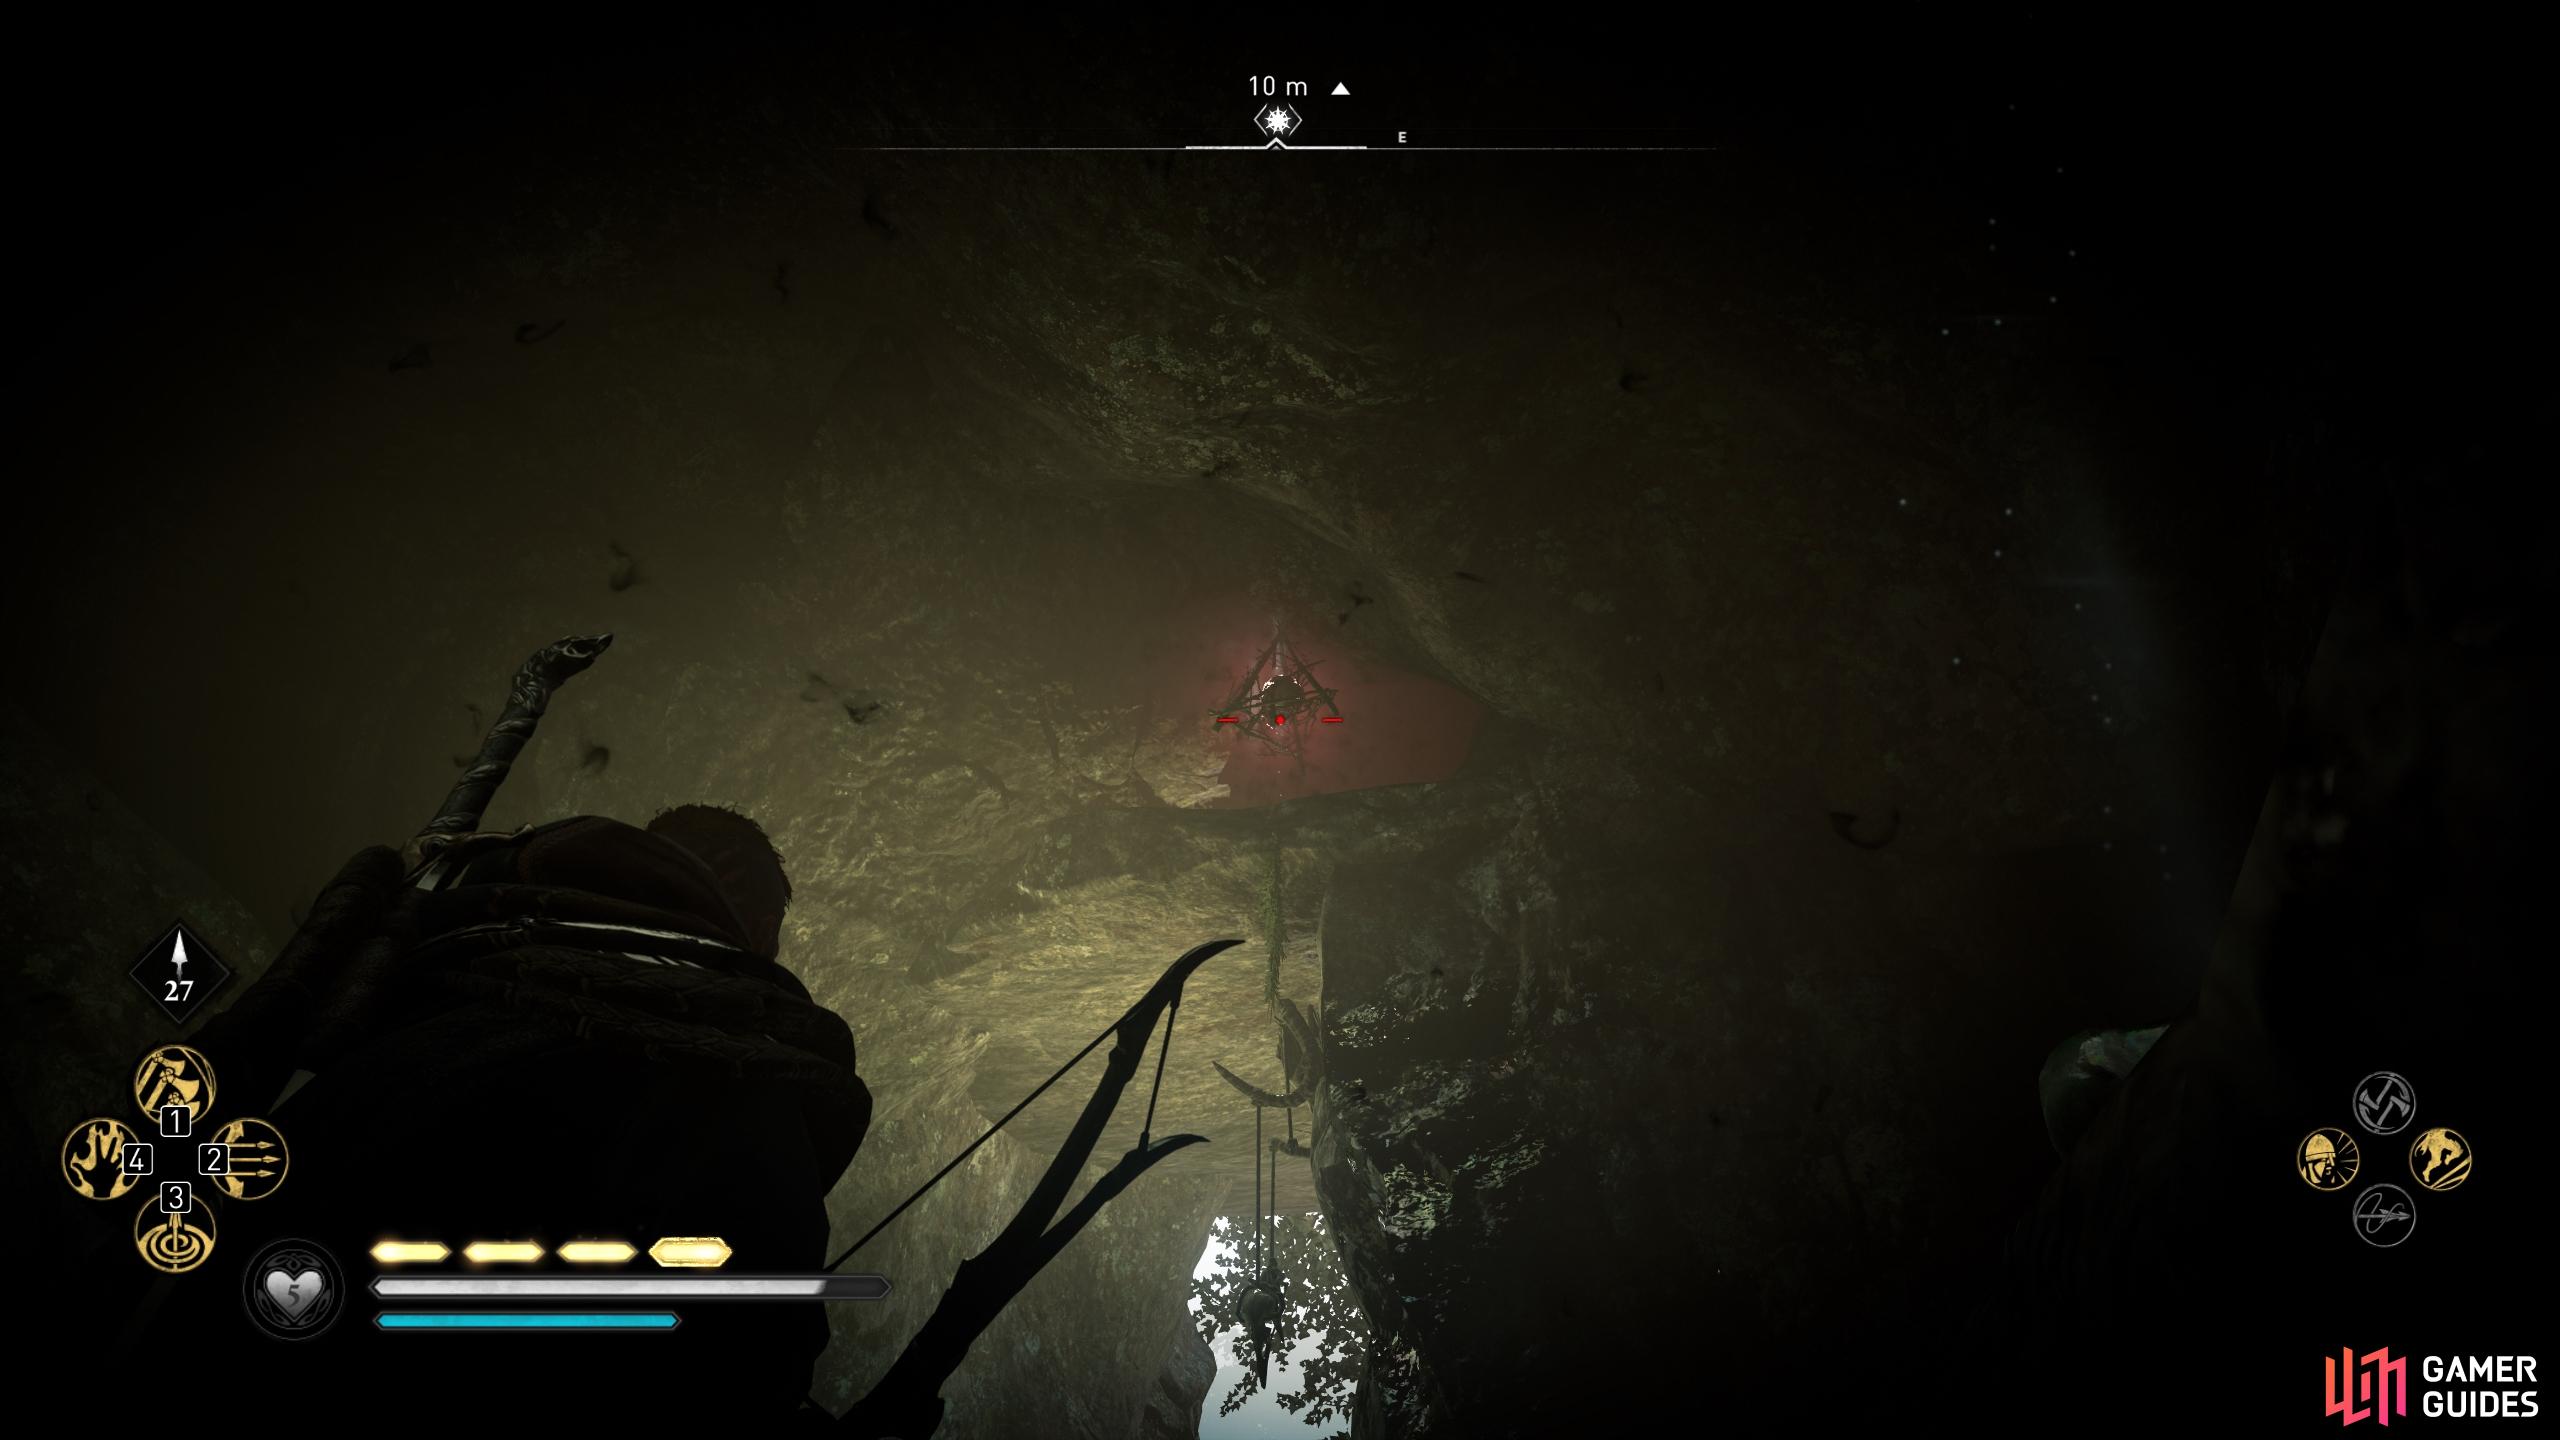 Once youre in the cave, look up to find the symbol near the top.